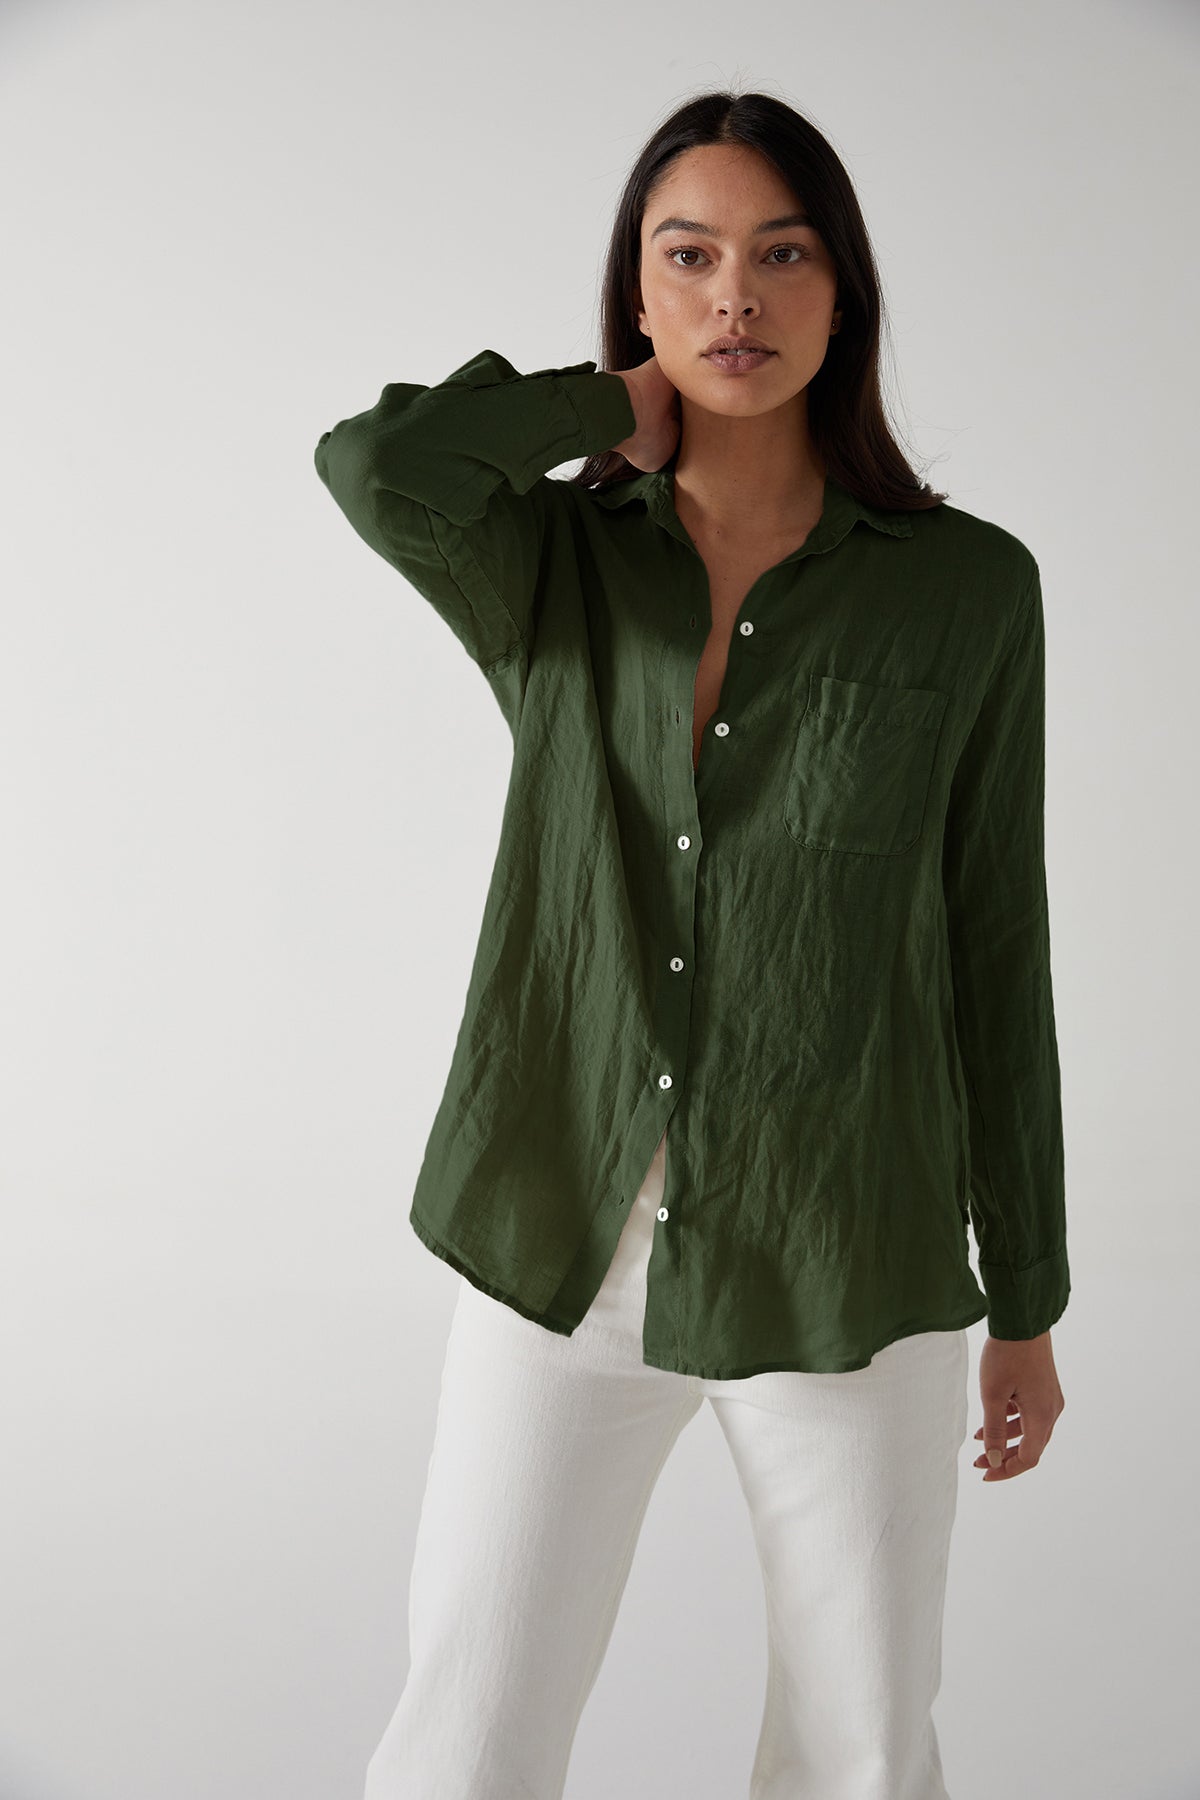 Mulholland Button Up Linen Shirt in Dark Green Dillweed Front-24344561123521